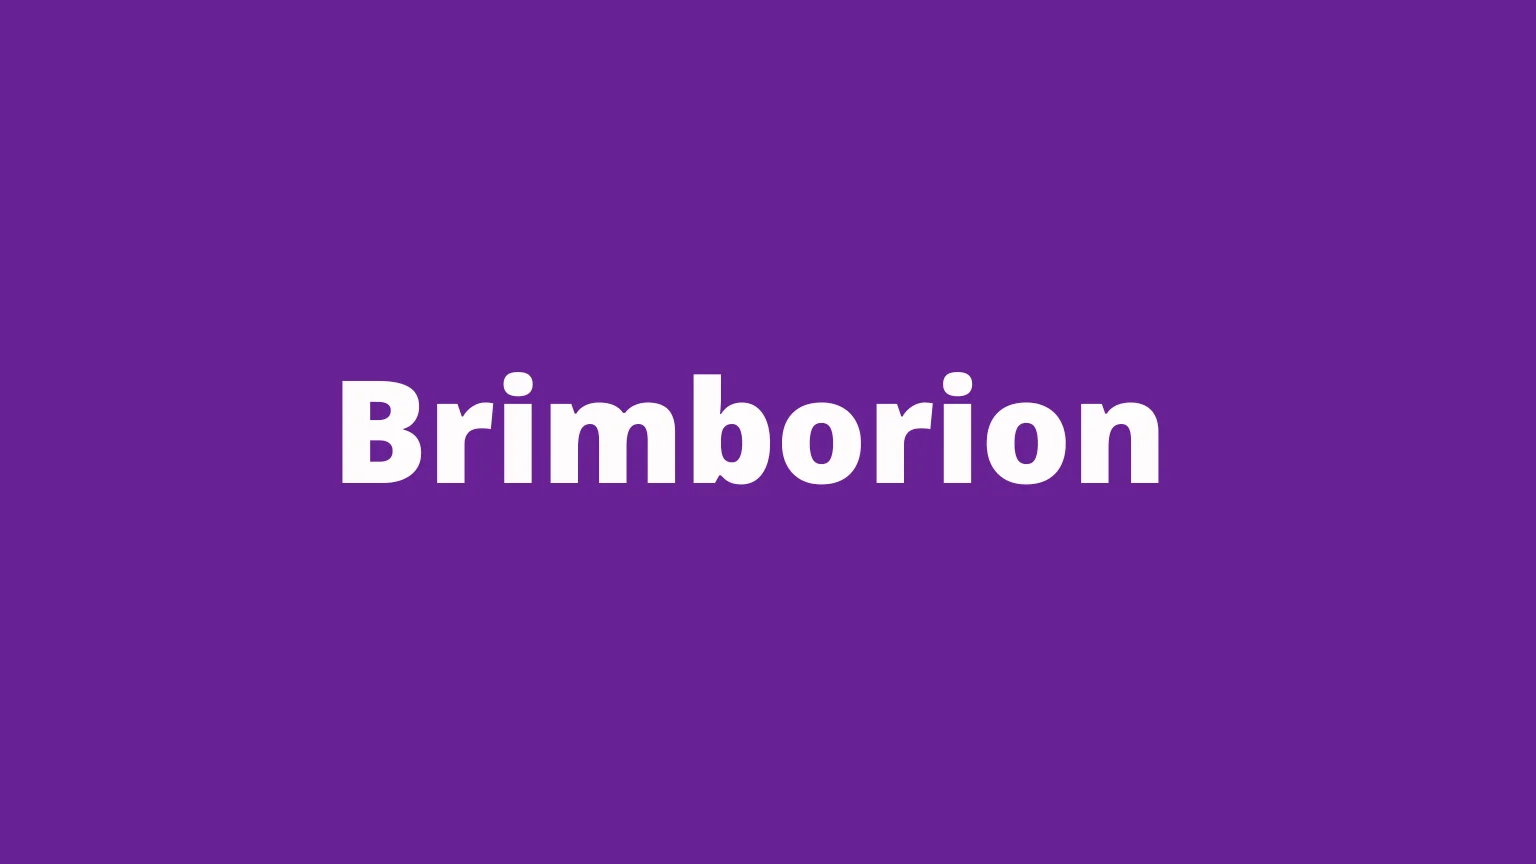 The word brimborion and its meaning